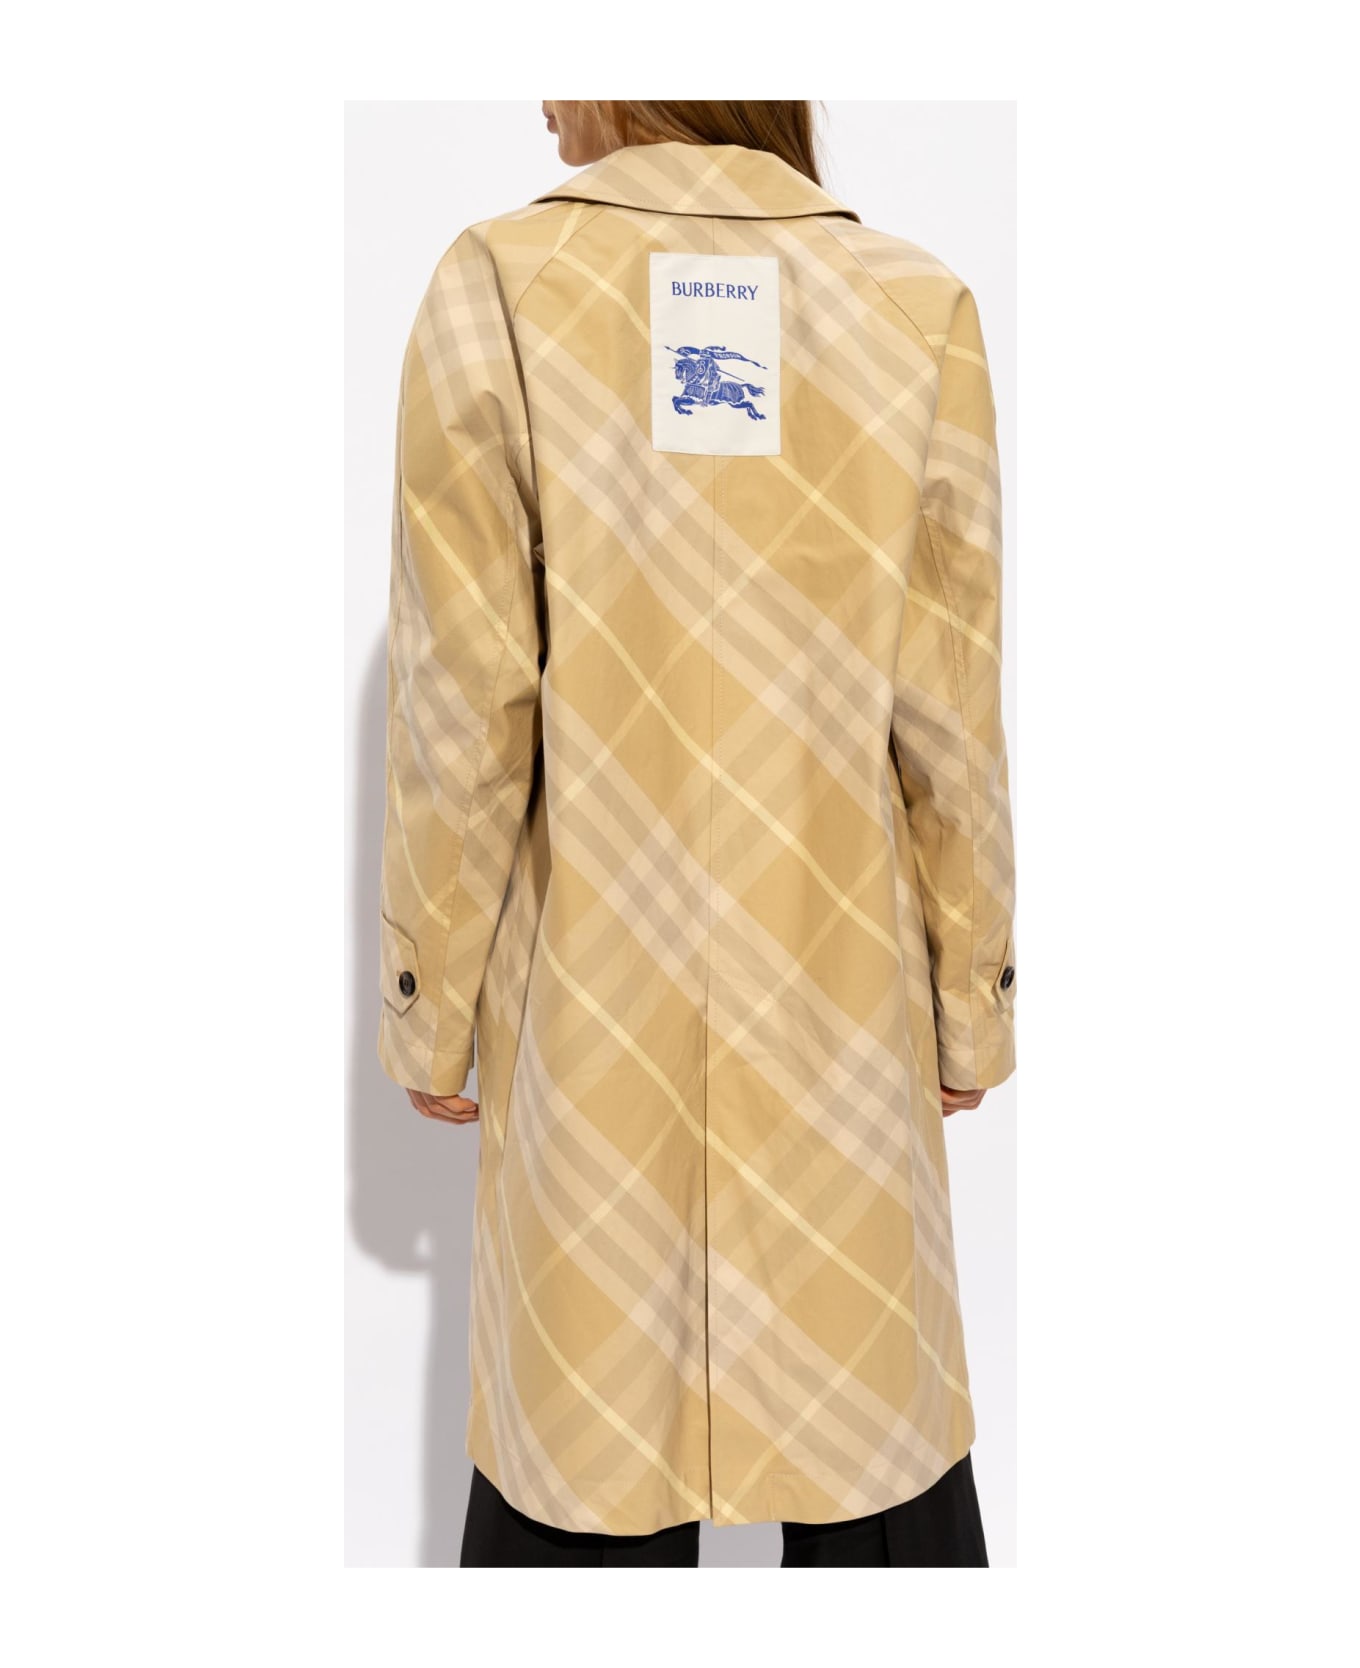 Burberry Reversible Trench Coat - Flax